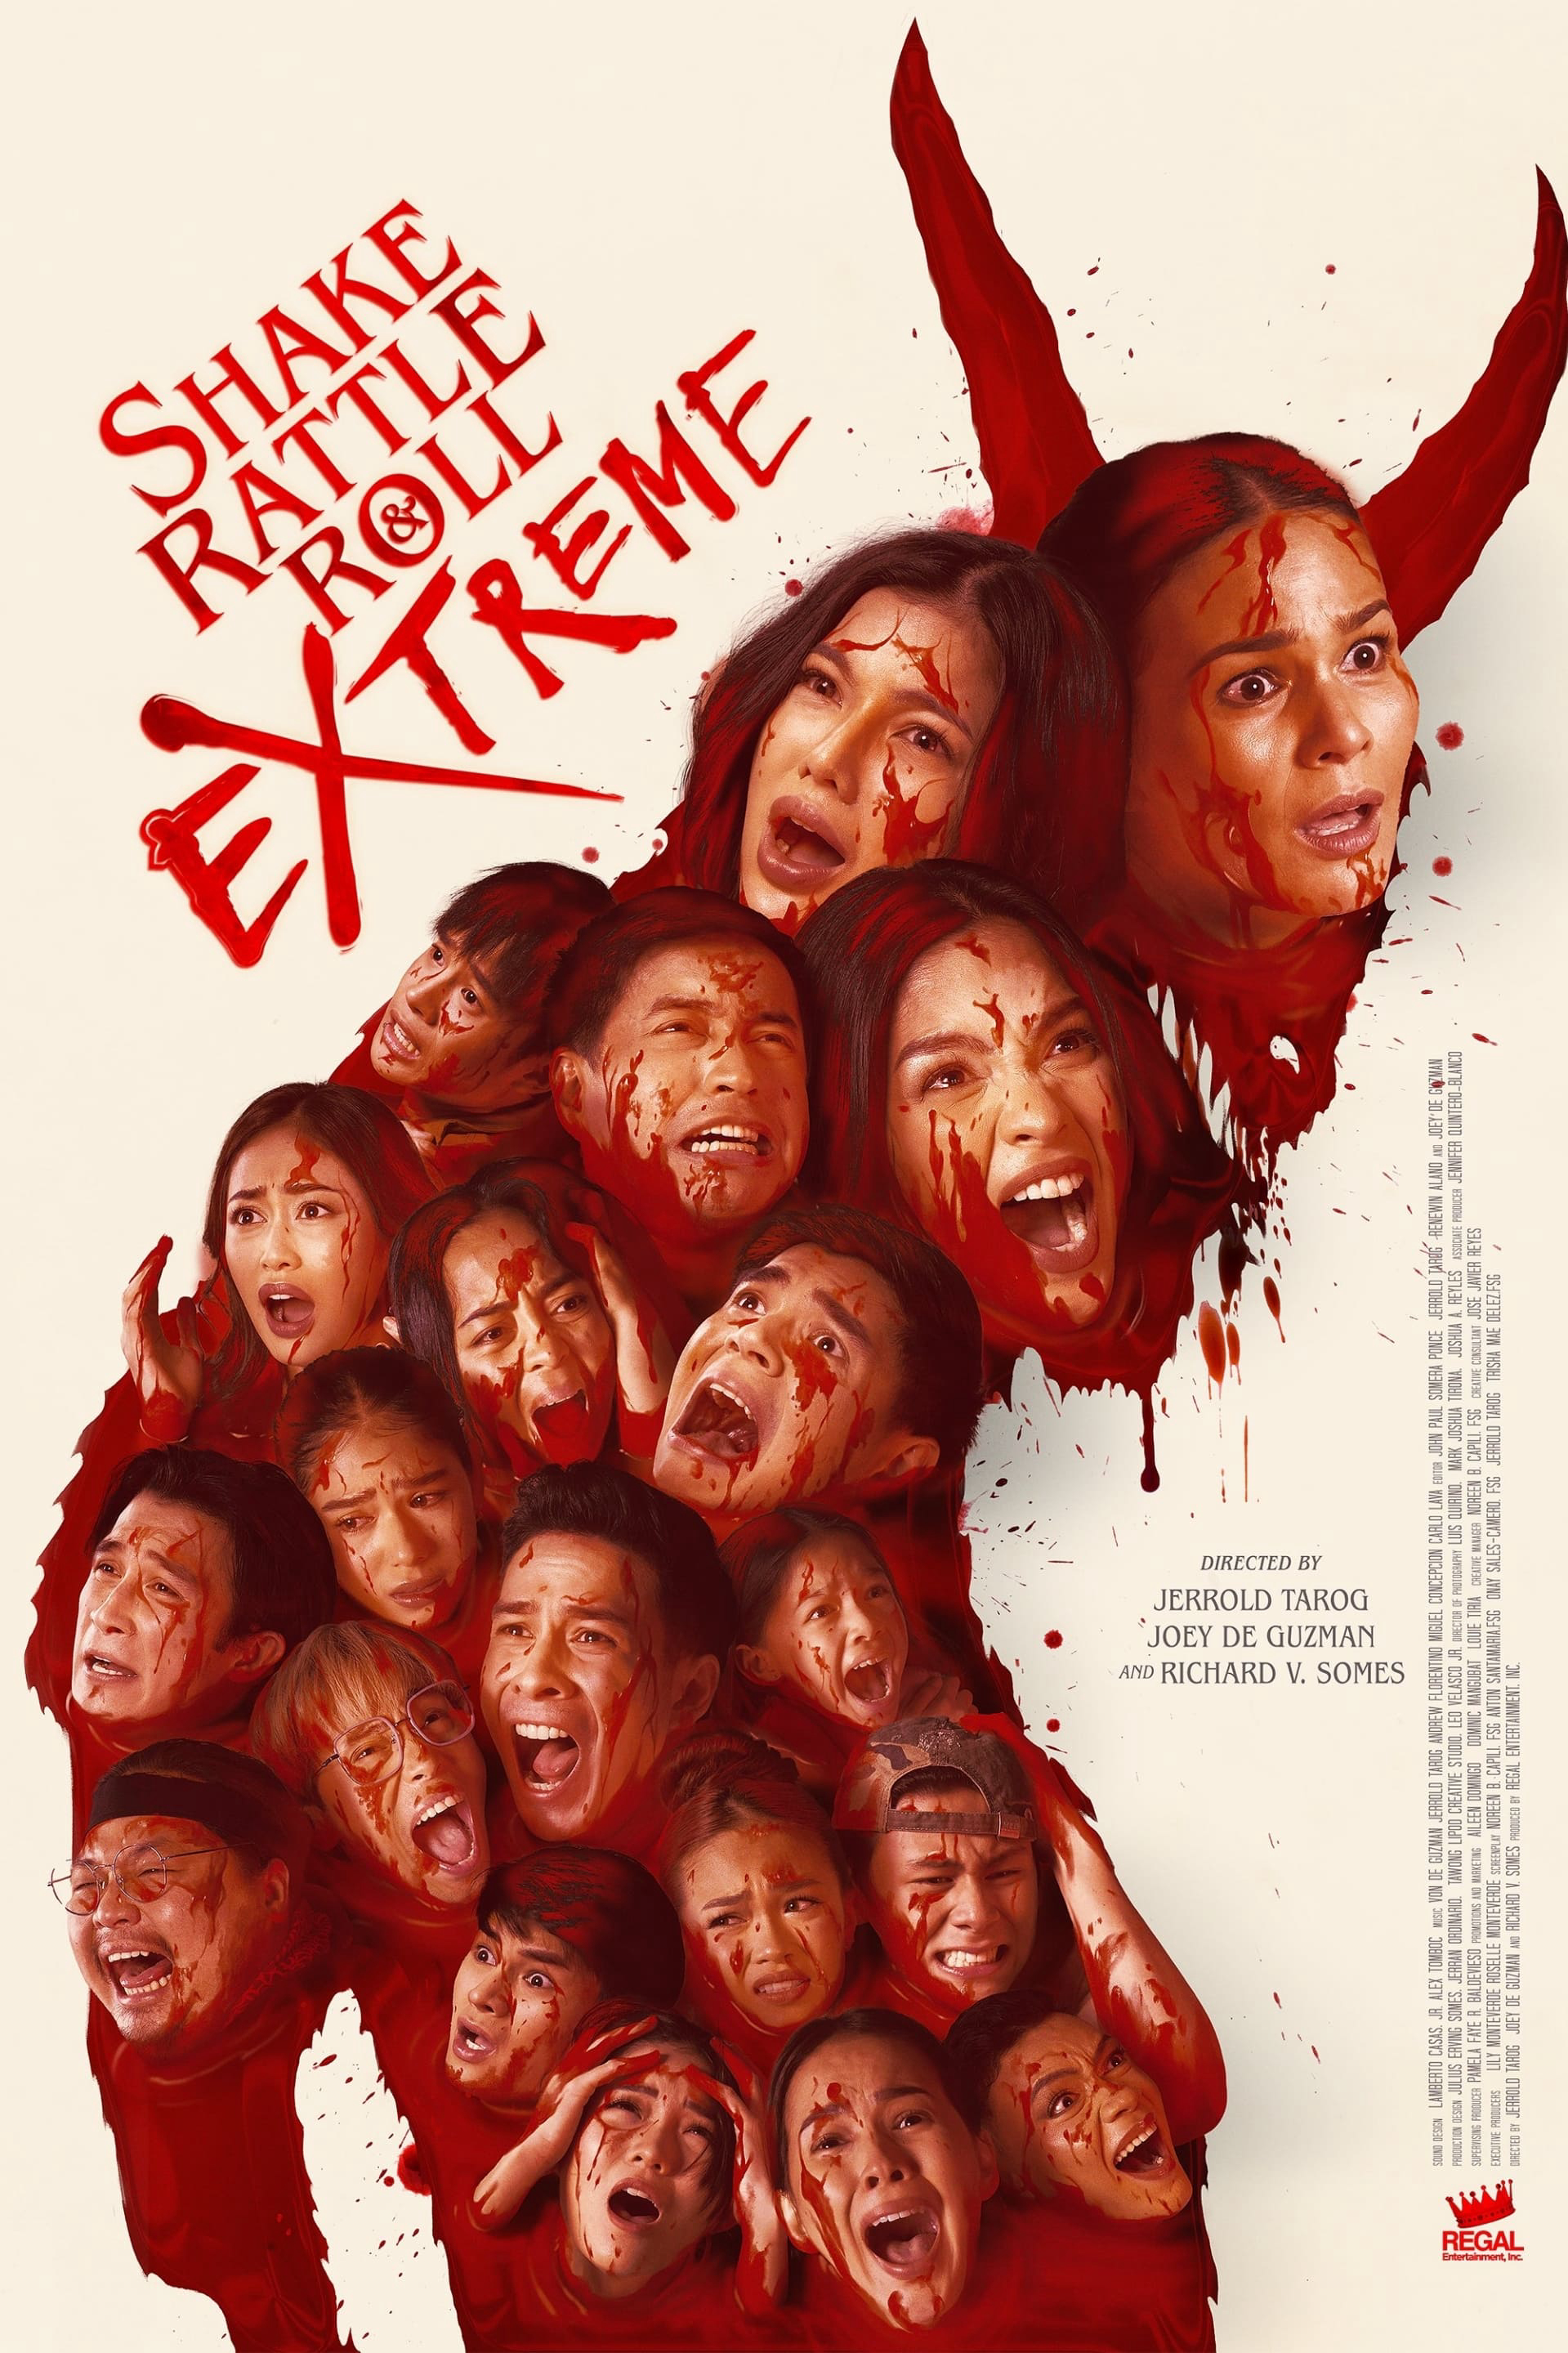 Poster Phim Shake, Rattle & Roll Extreme (Shake, Rattle & Roll Extreme)